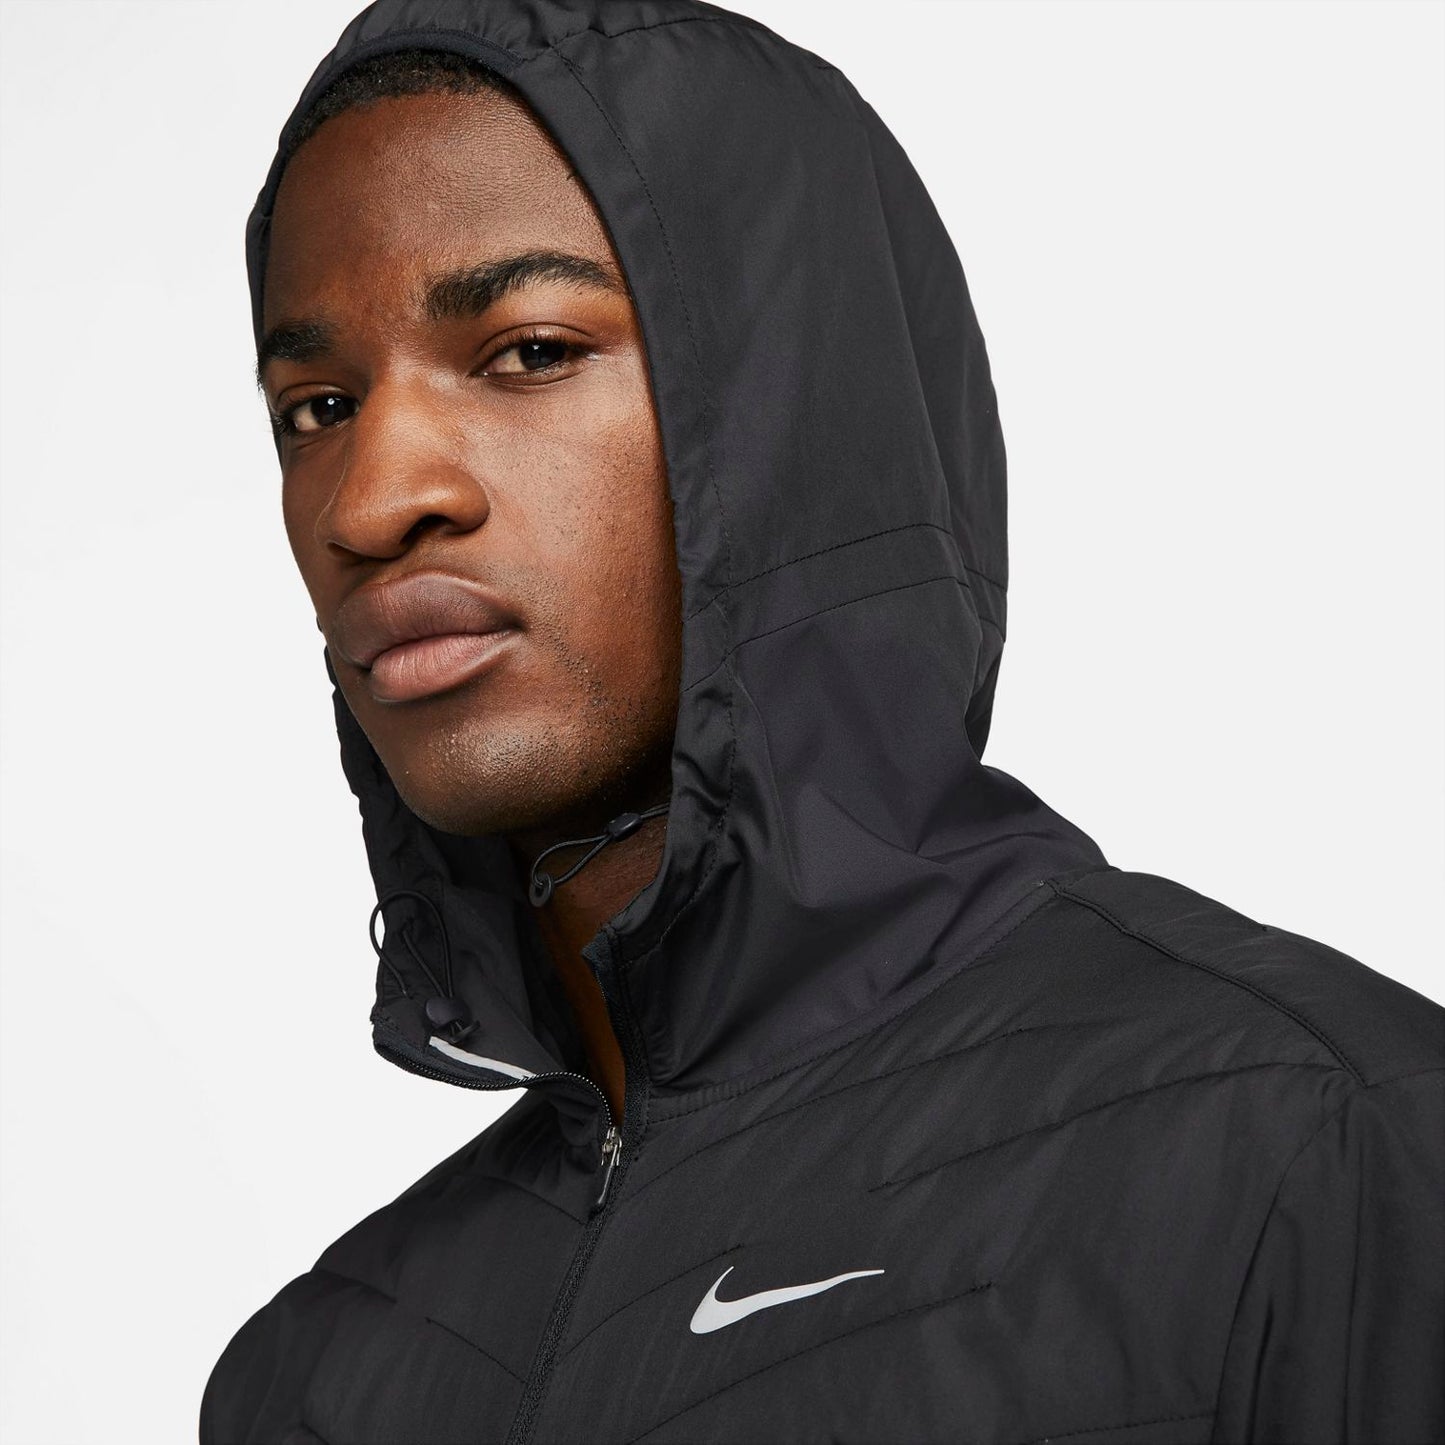 Men's Nike Therma-FIT Repel Synthetic-Fill Running Jacket - Black/Reflective Silver